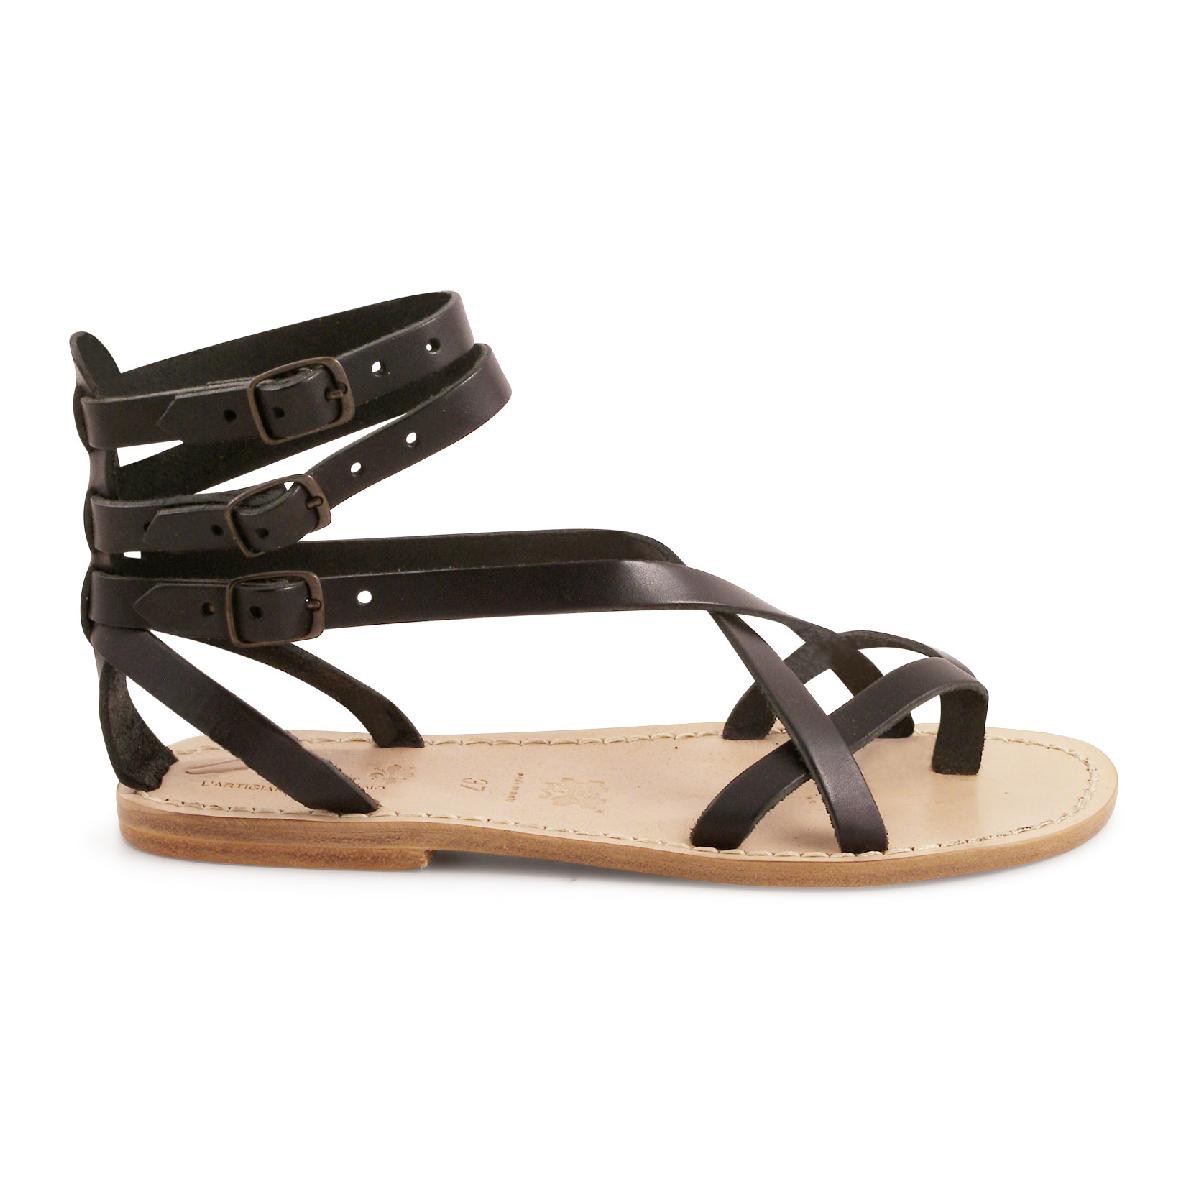 Gladiator sandals for women in black leather handmade | The leather ...